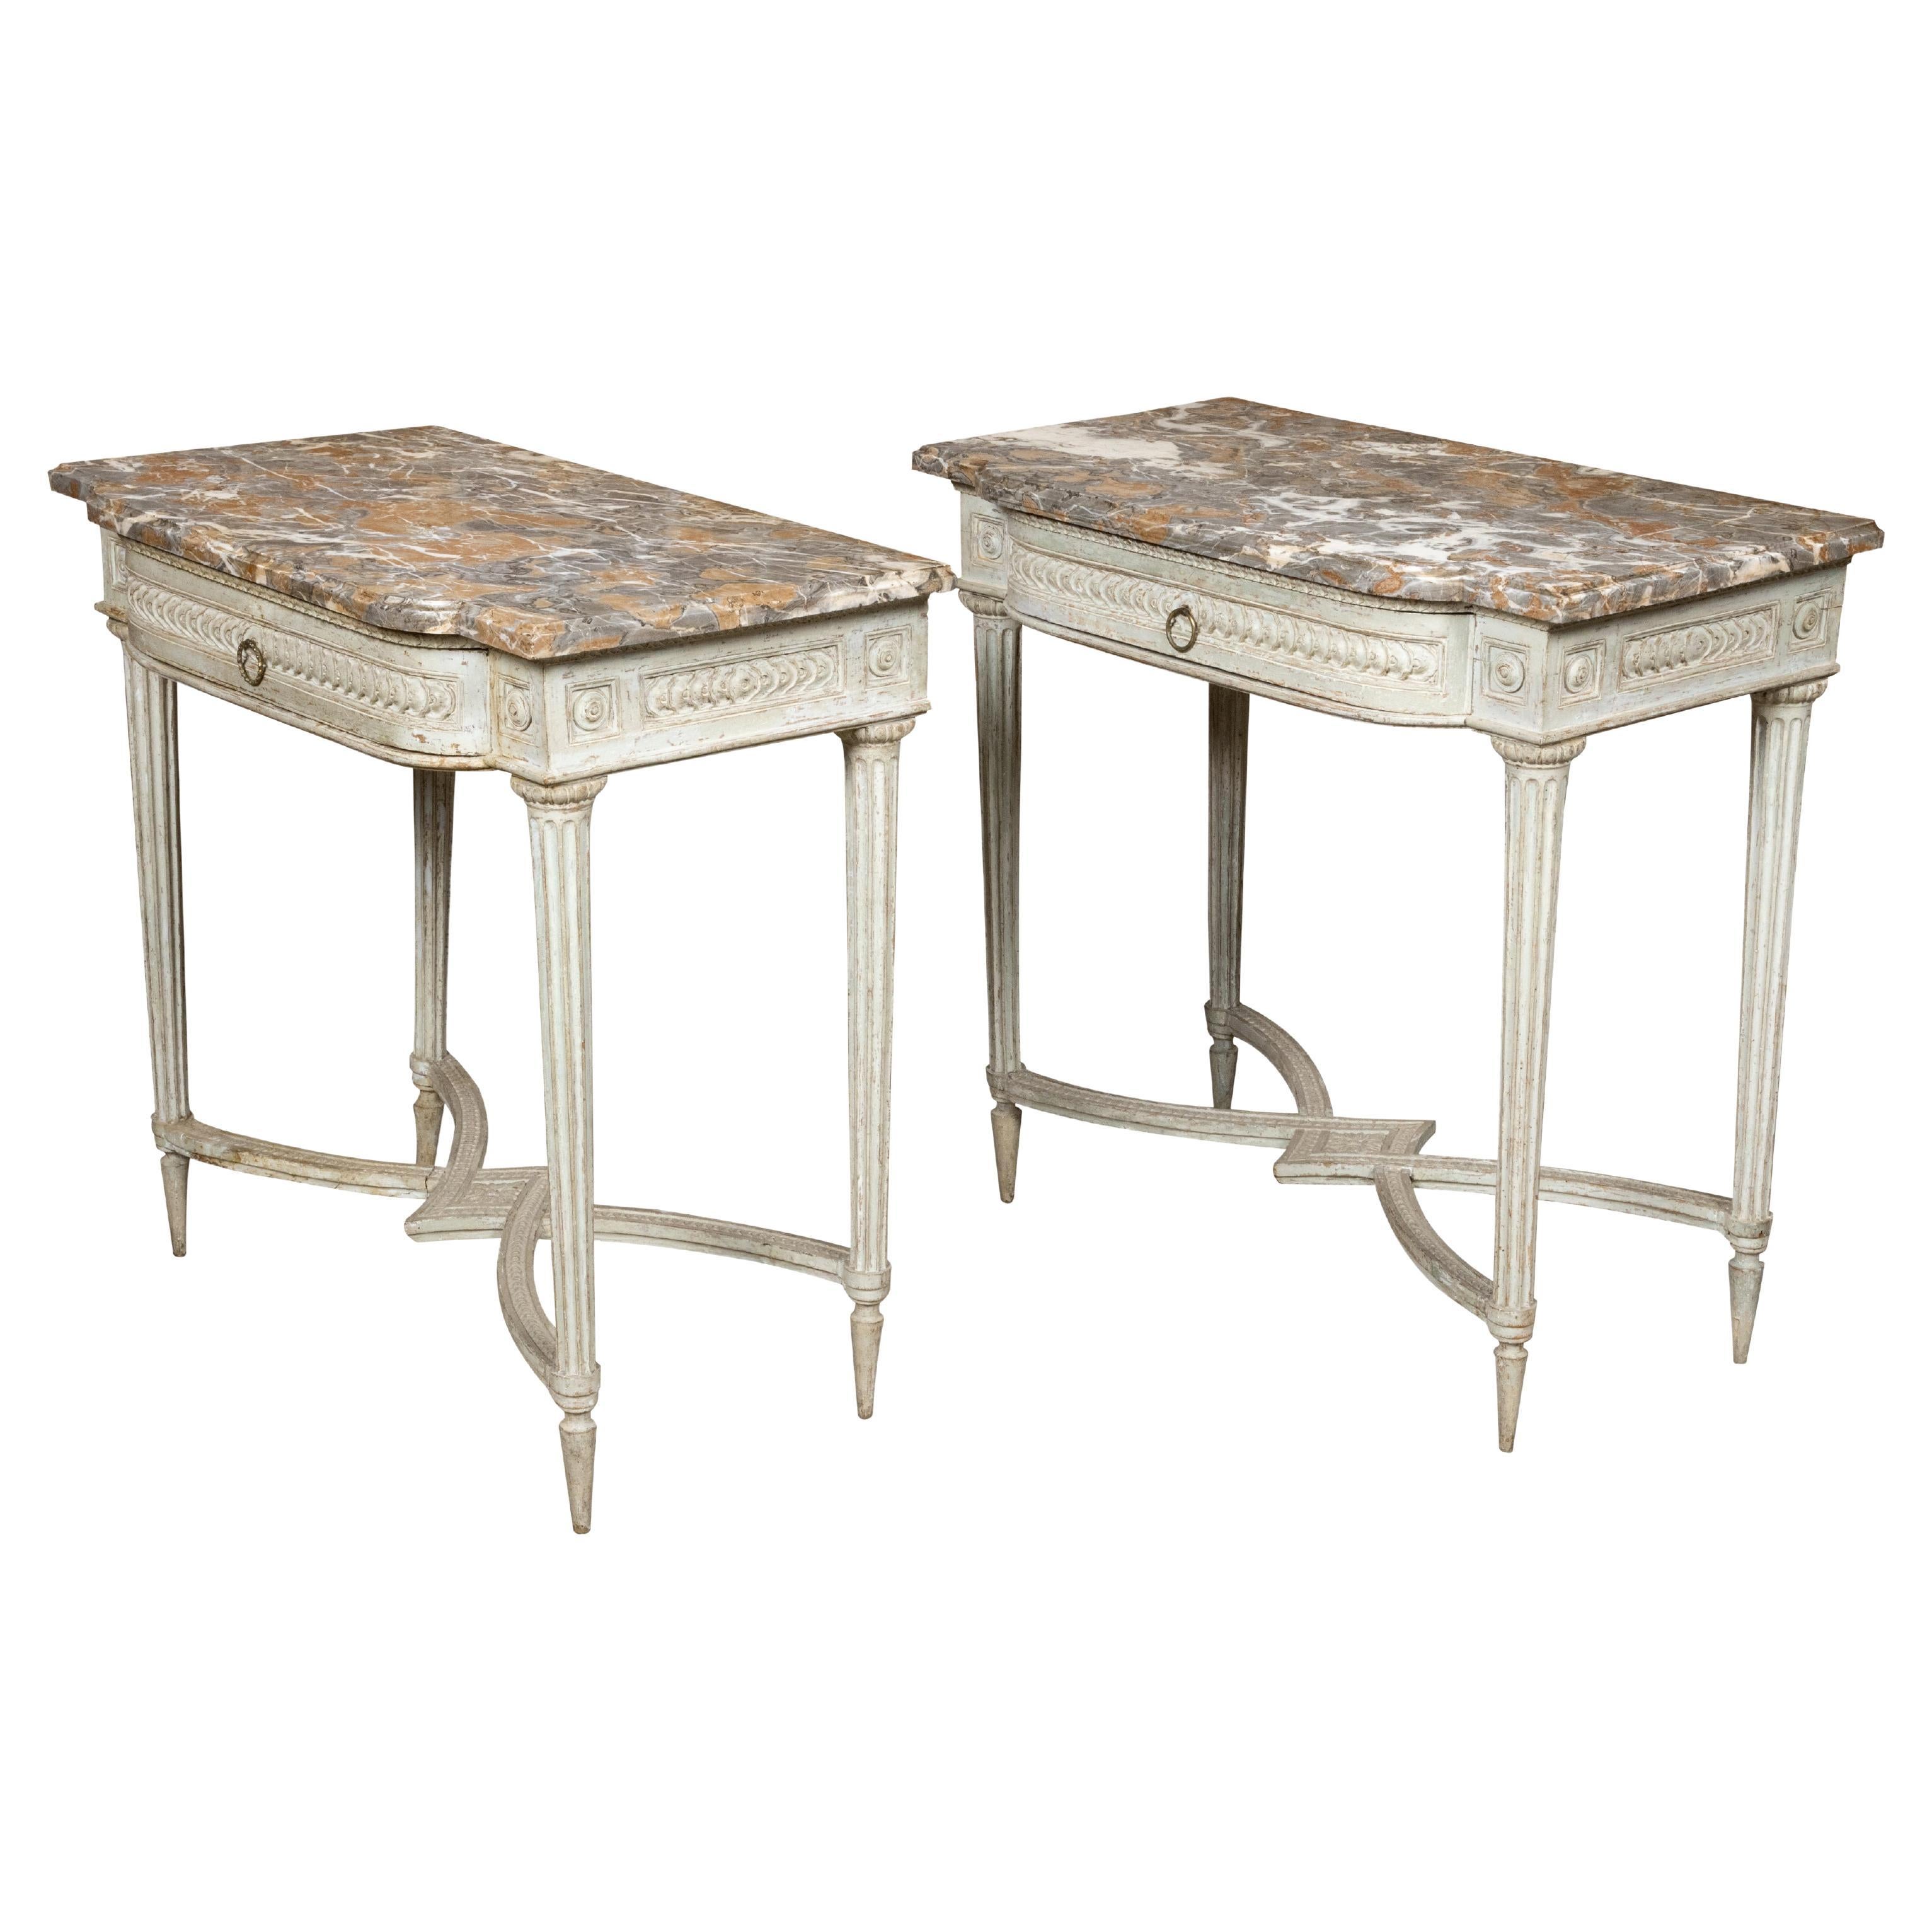 Pair of French Louis XVI 18th Century Painted Console Tables with Marble Tops